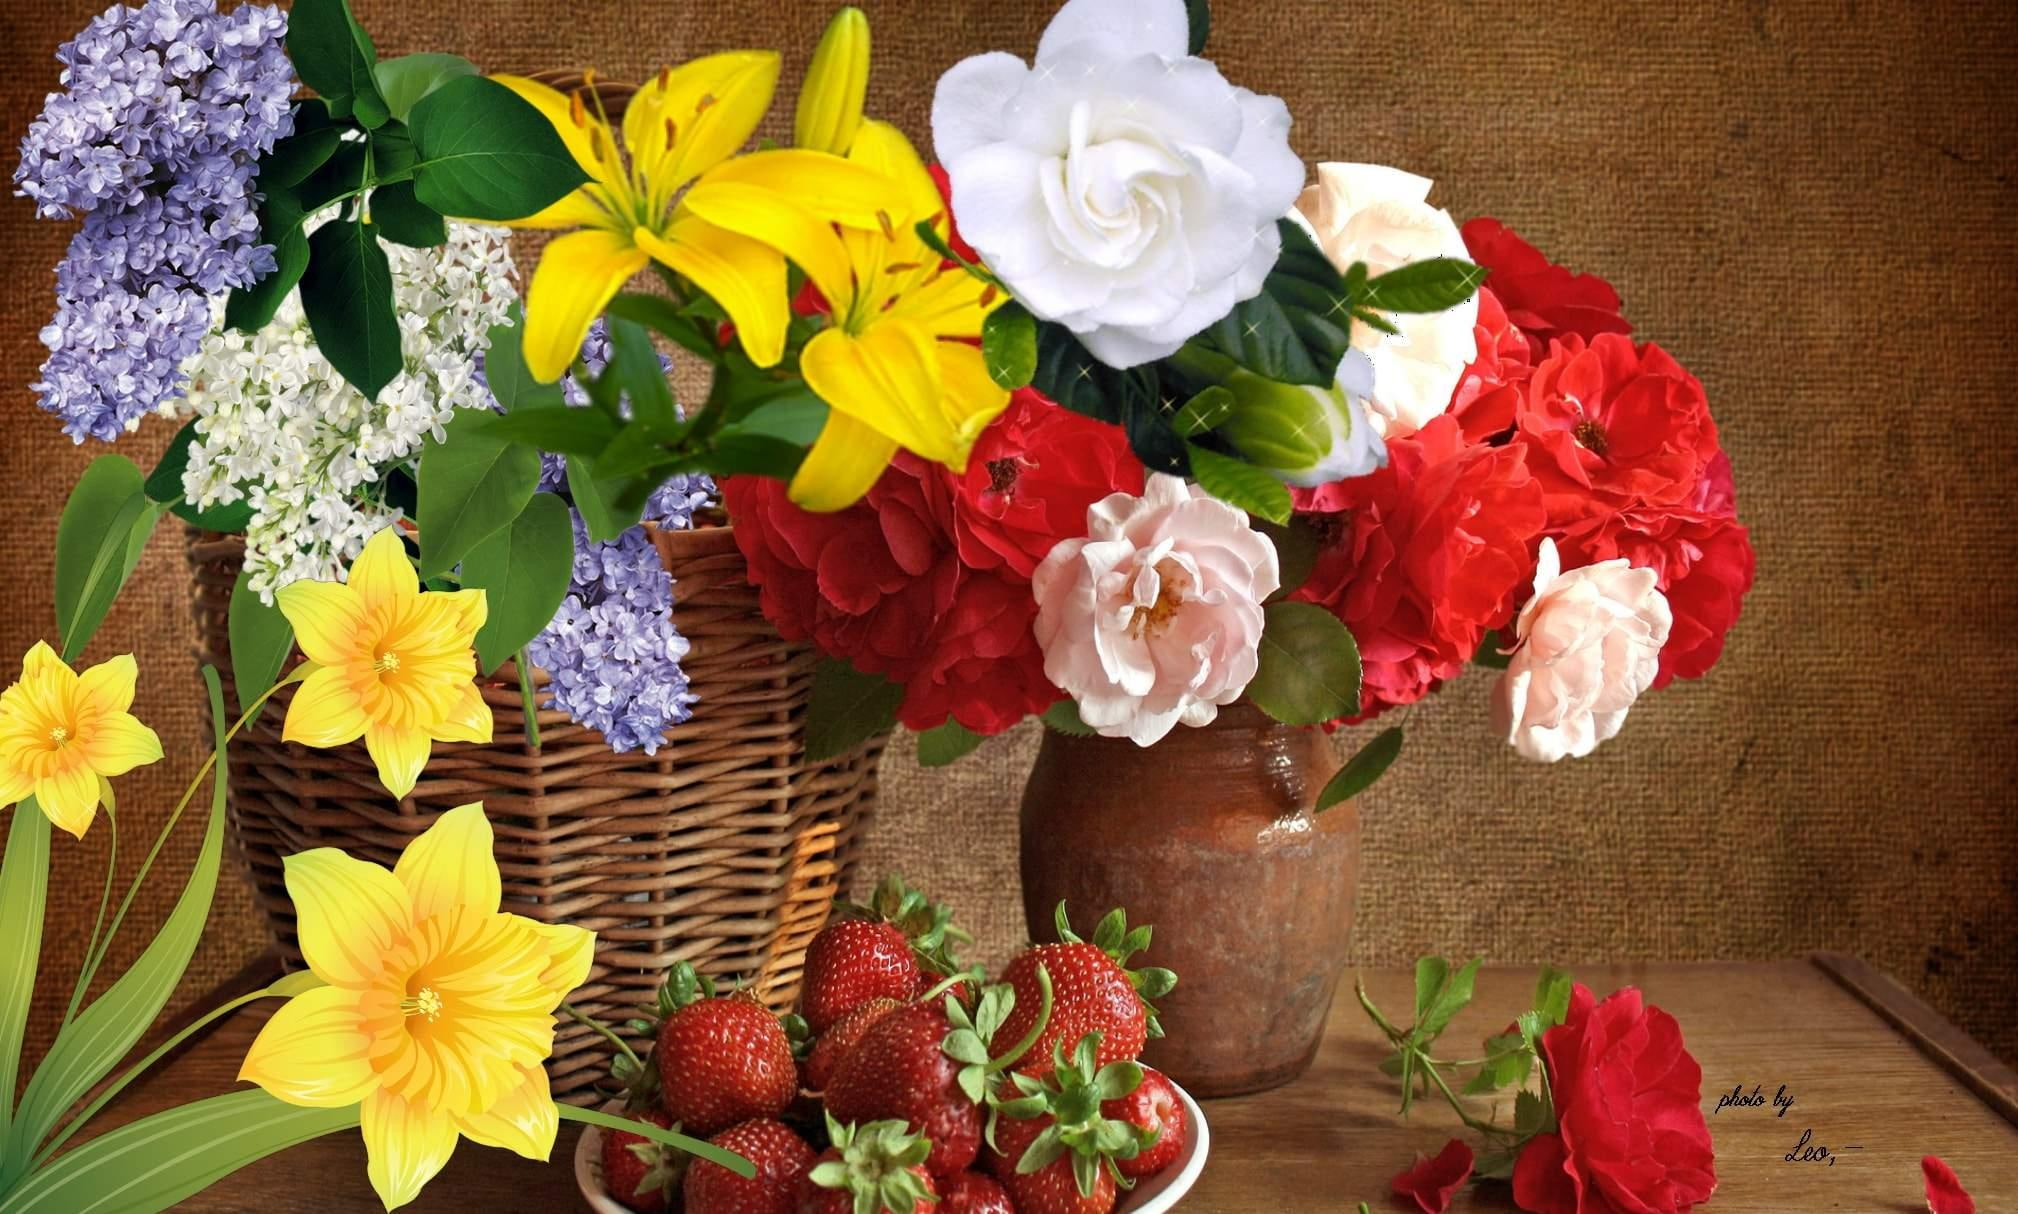 Bouquets Of Flowers Strawberries, vase, basket, nature and landscapes